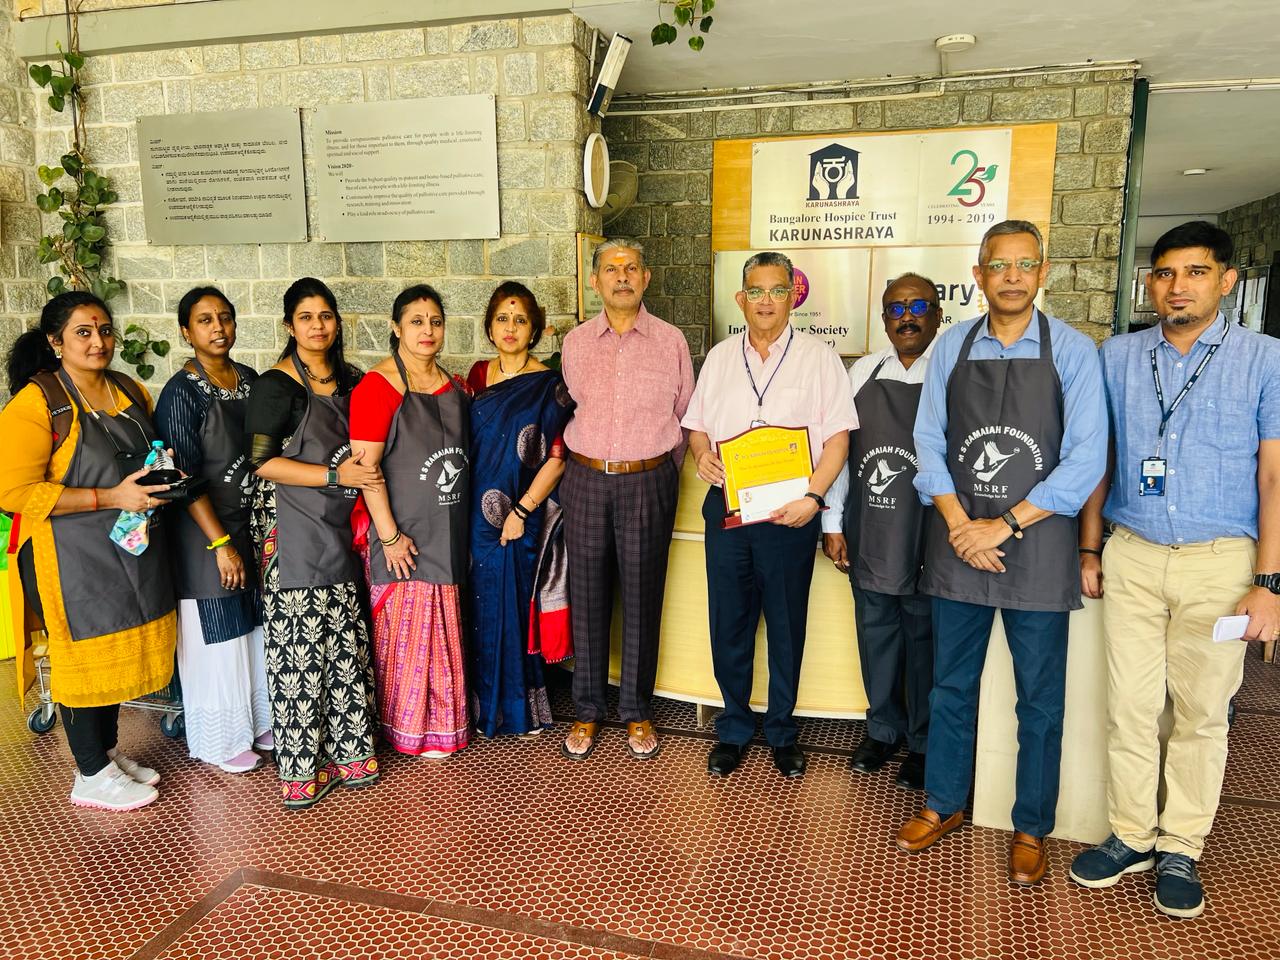 MSRF has organised a visit to Karunashraya Bangalore Hospice Care as a part of Institutional Social Responsibility. Students did voluntary services to the facility.